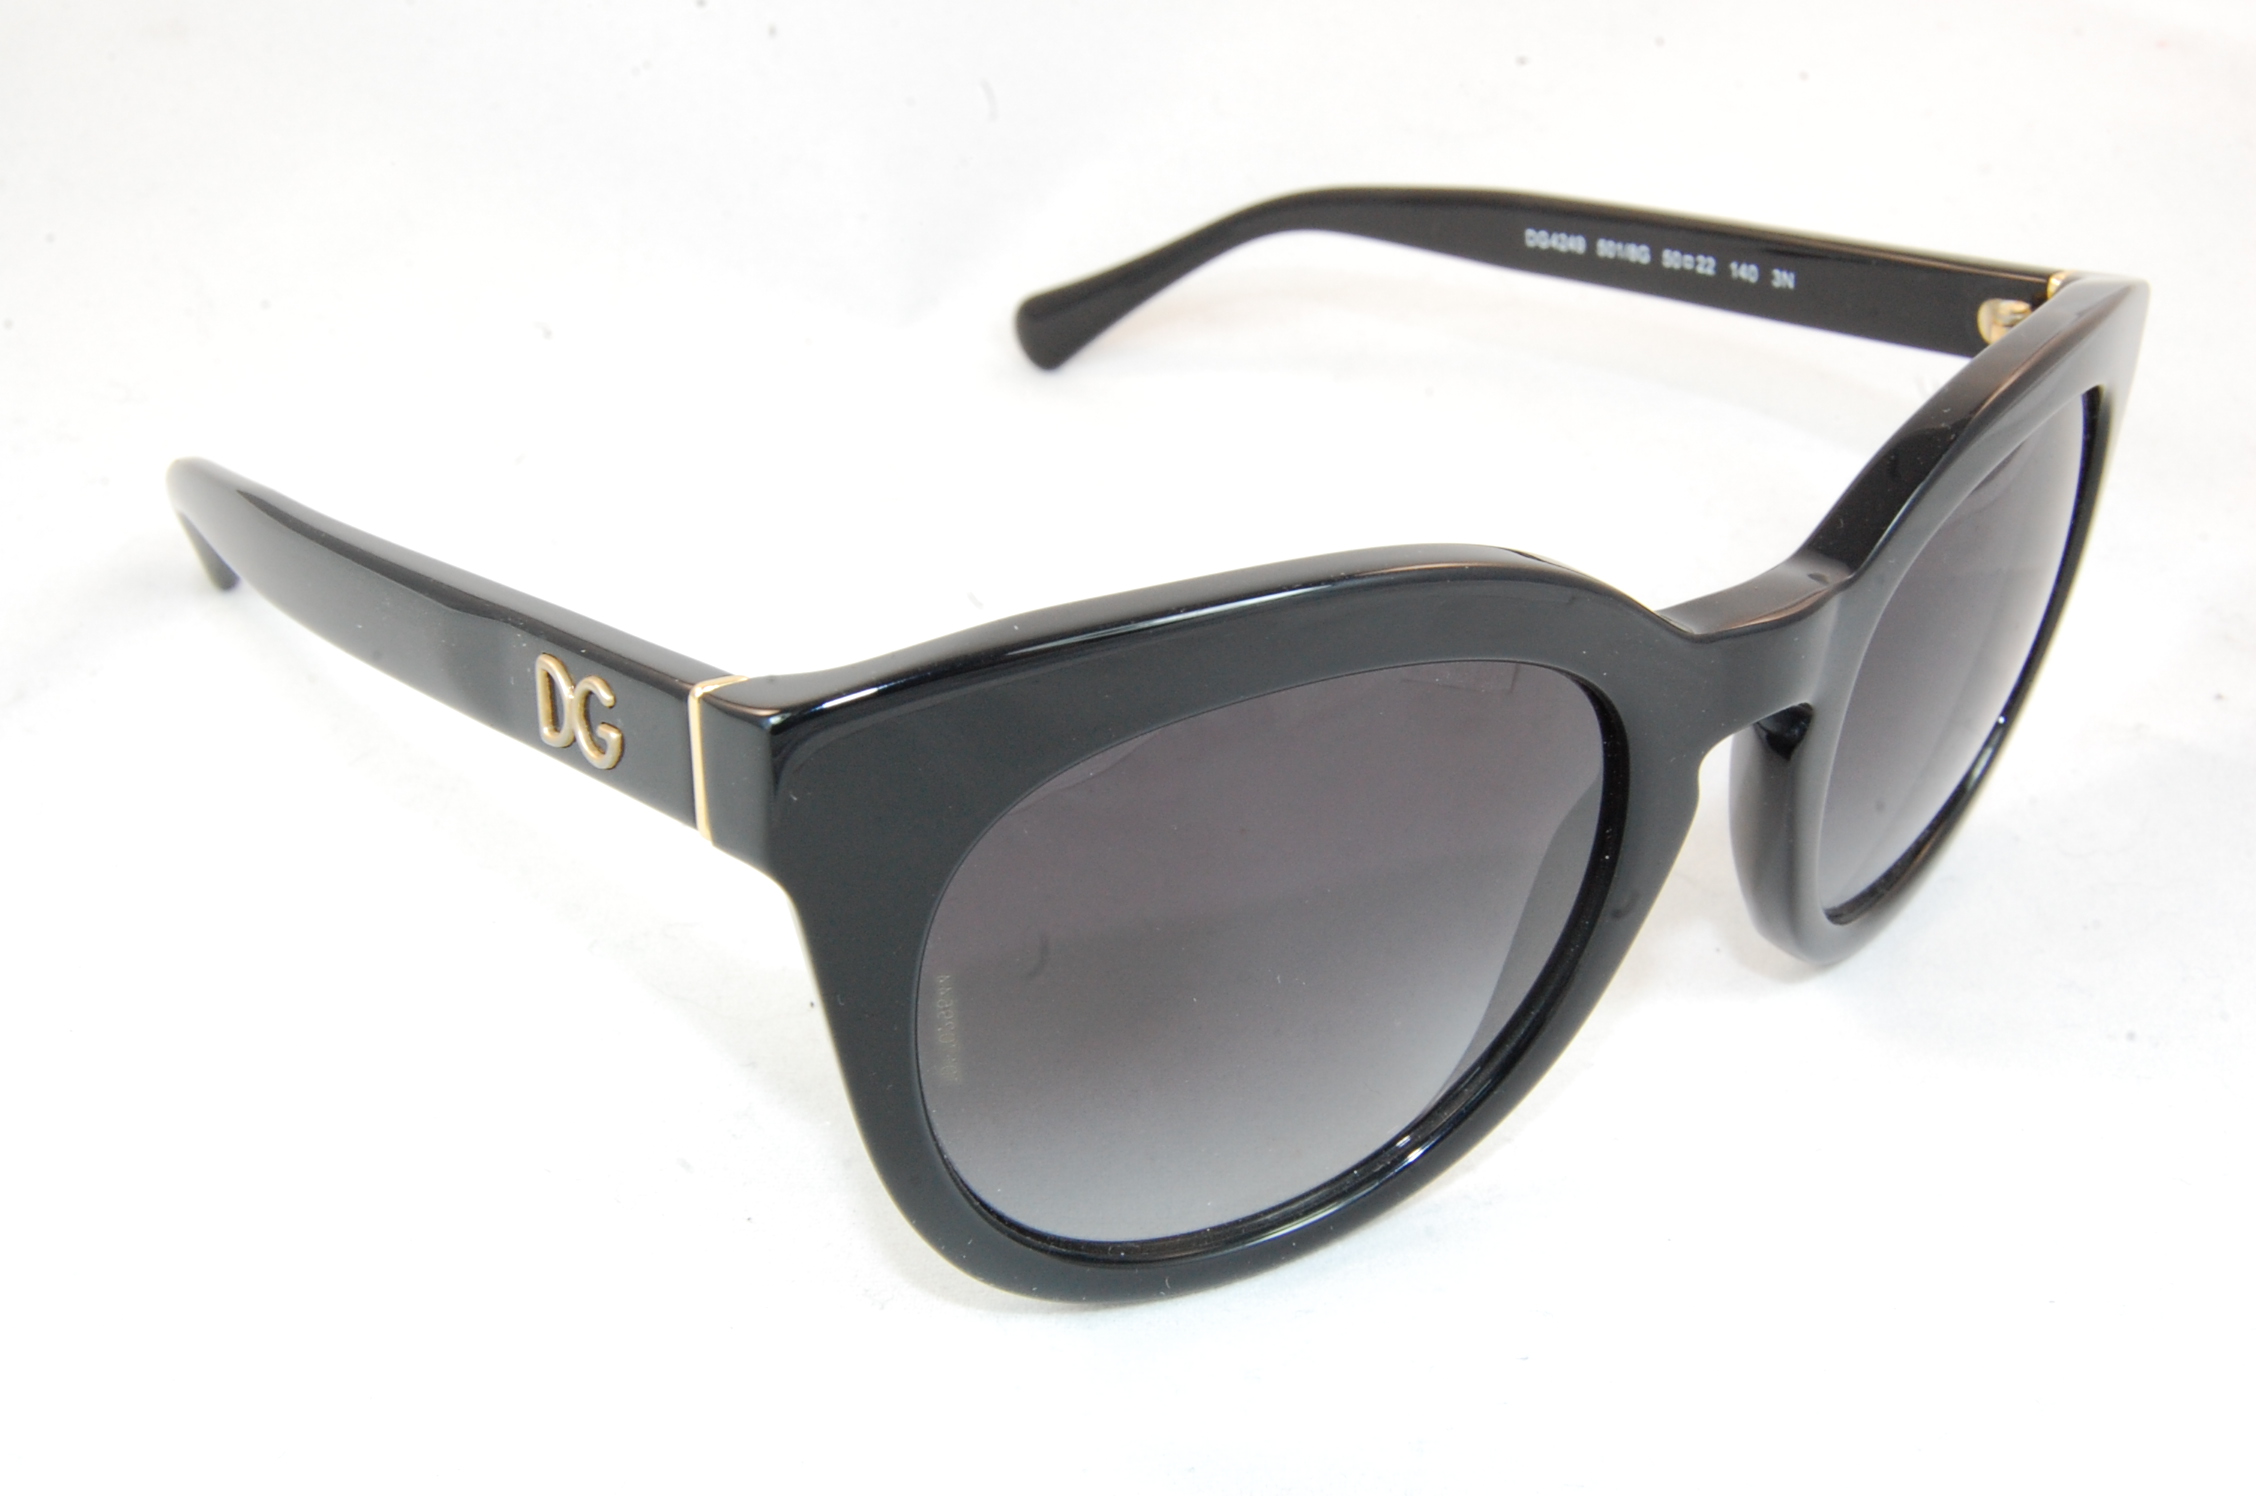 DOLCE & GABBANA OPTIQUE 10/10 FACHES THUMESNIL